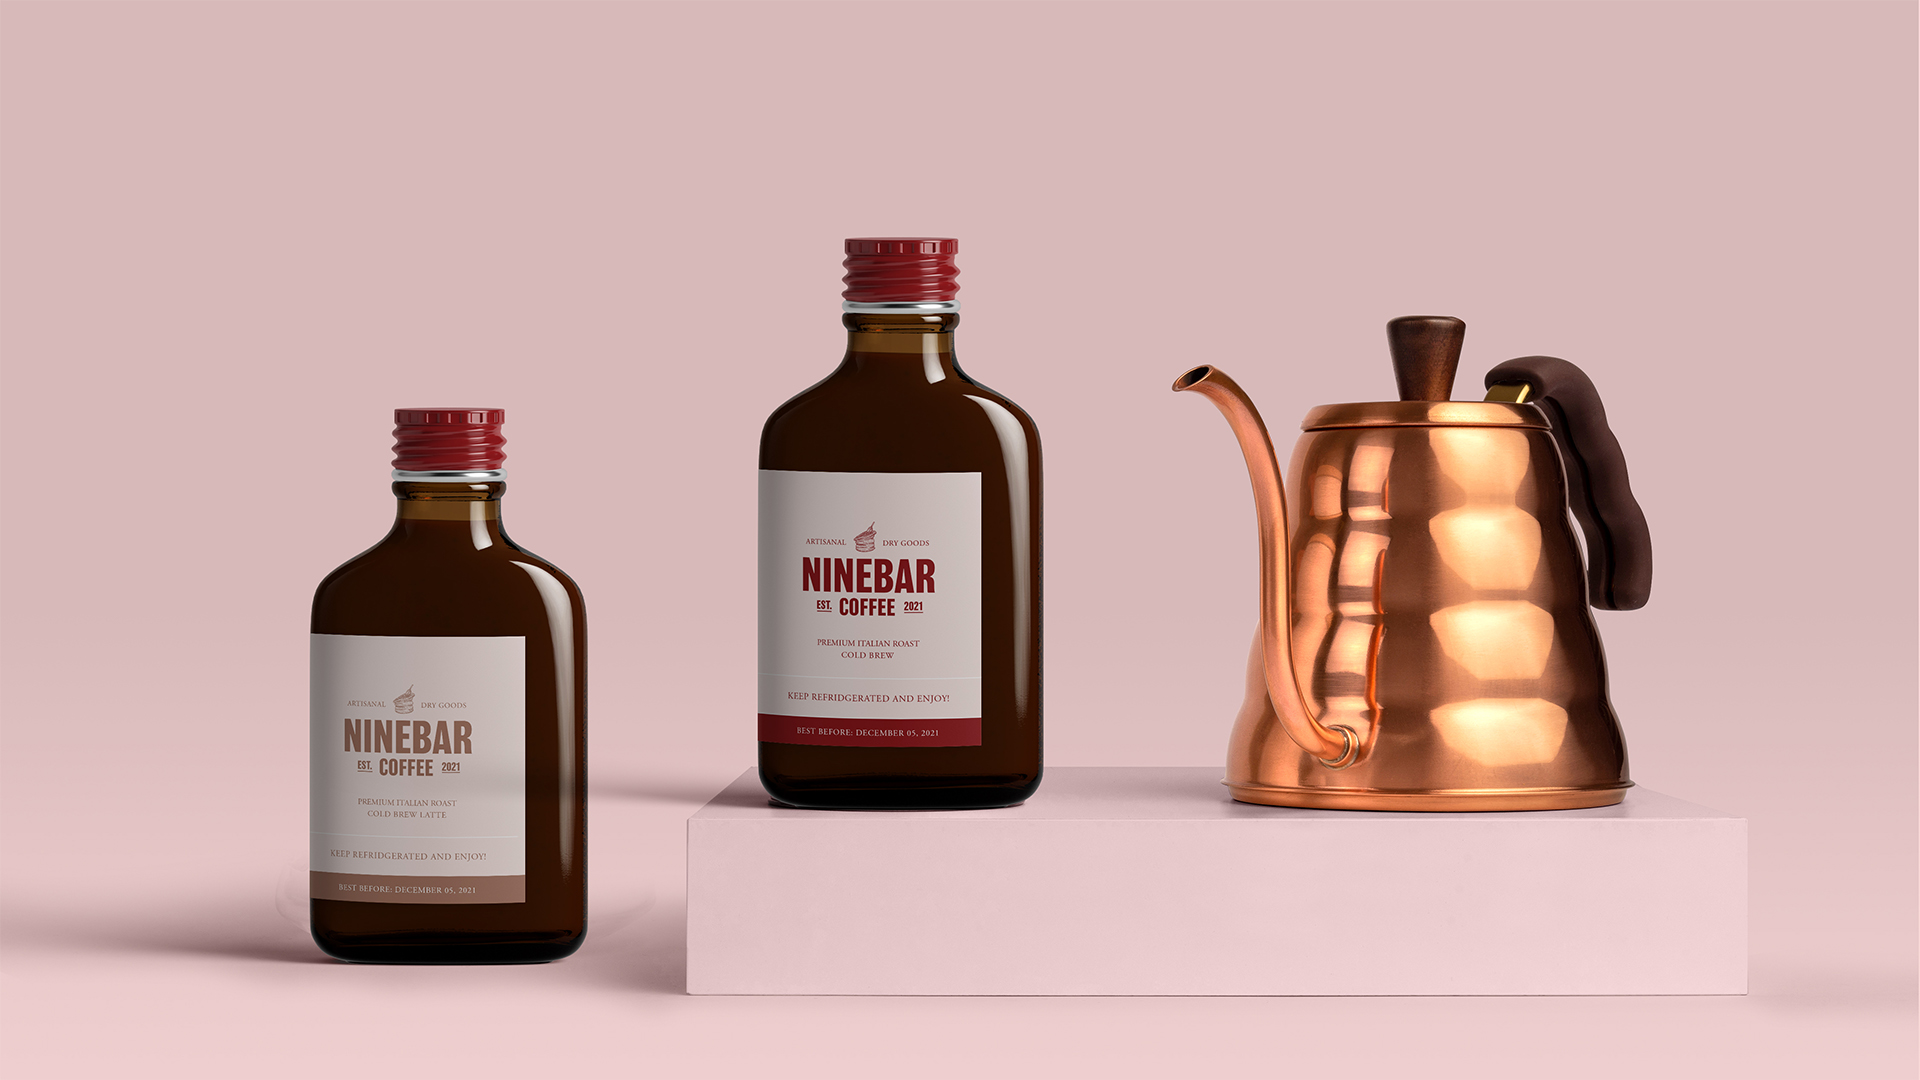 Ninebar Coffee Cold Brew Packaging Design